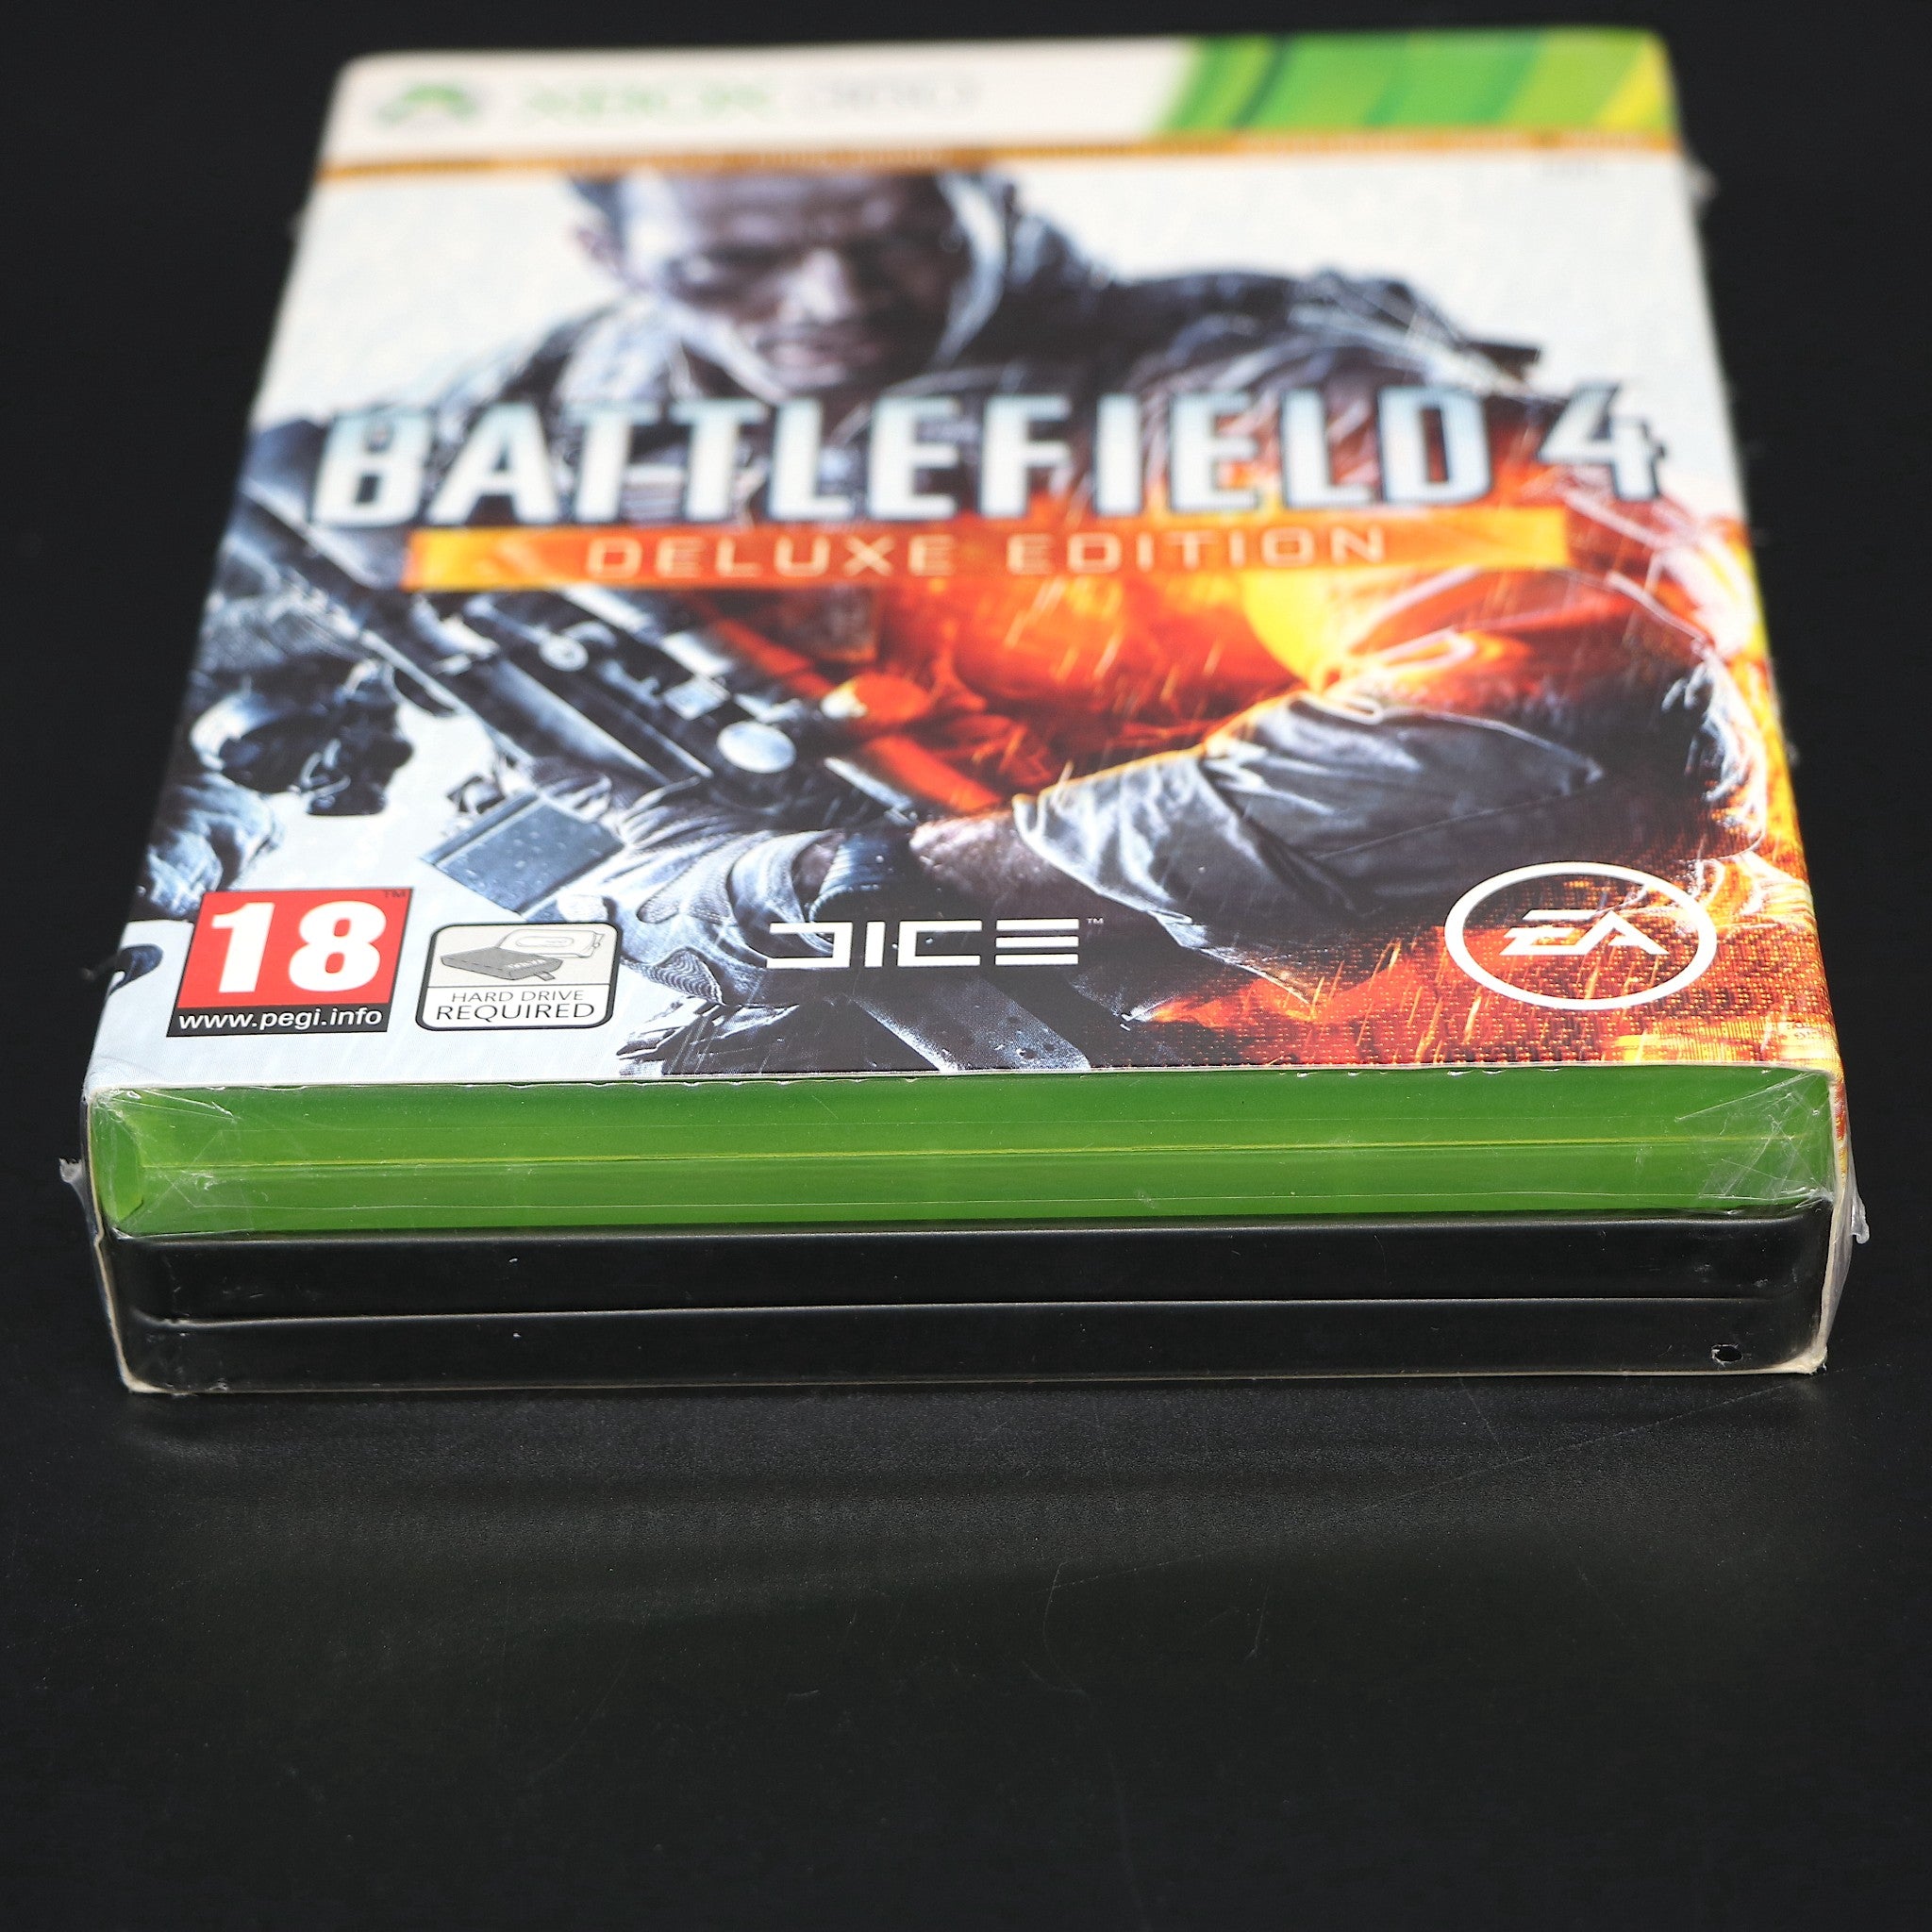 Battlefield 4 | Microsoft Xbox 360 Game | Deluxe Edition | New & Sealed